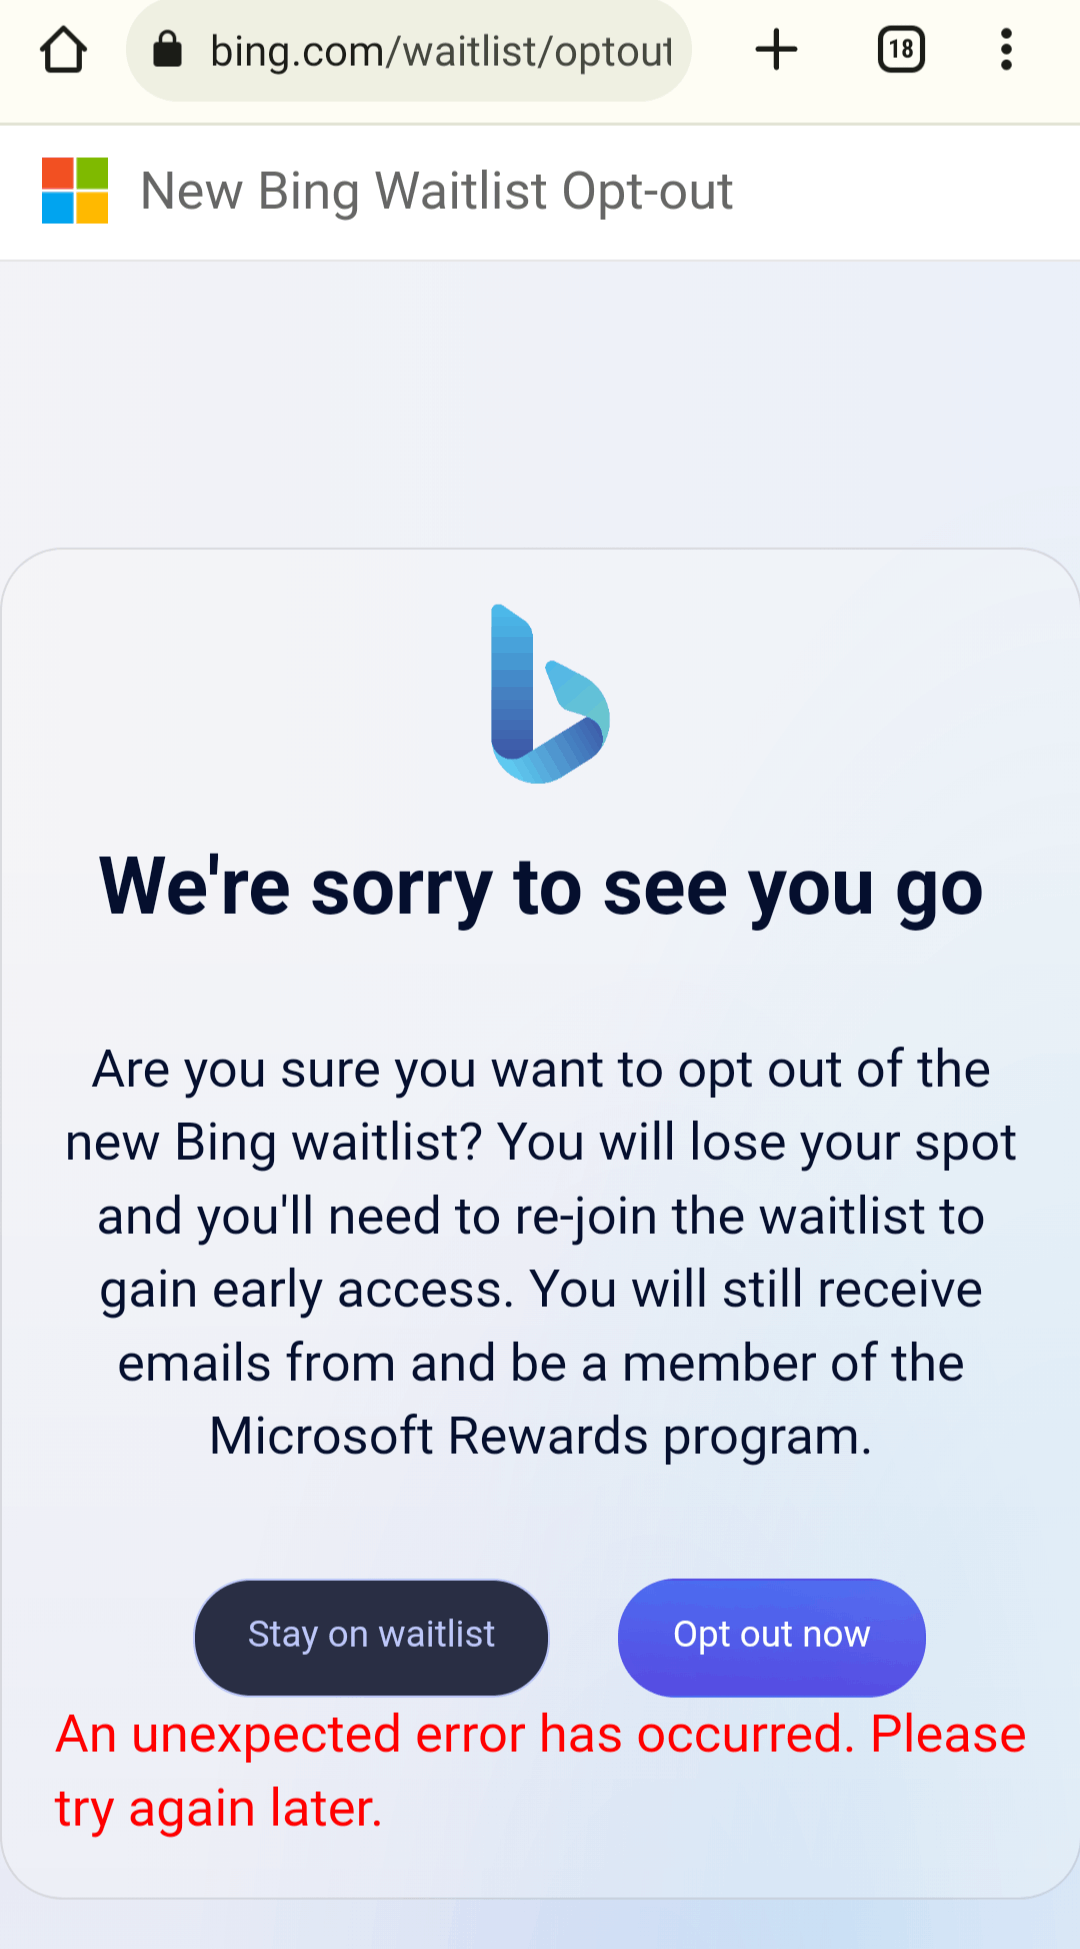 I Joined The New Bing Waiting Again, And Now I Can'T Access The New -  Microsoft Community